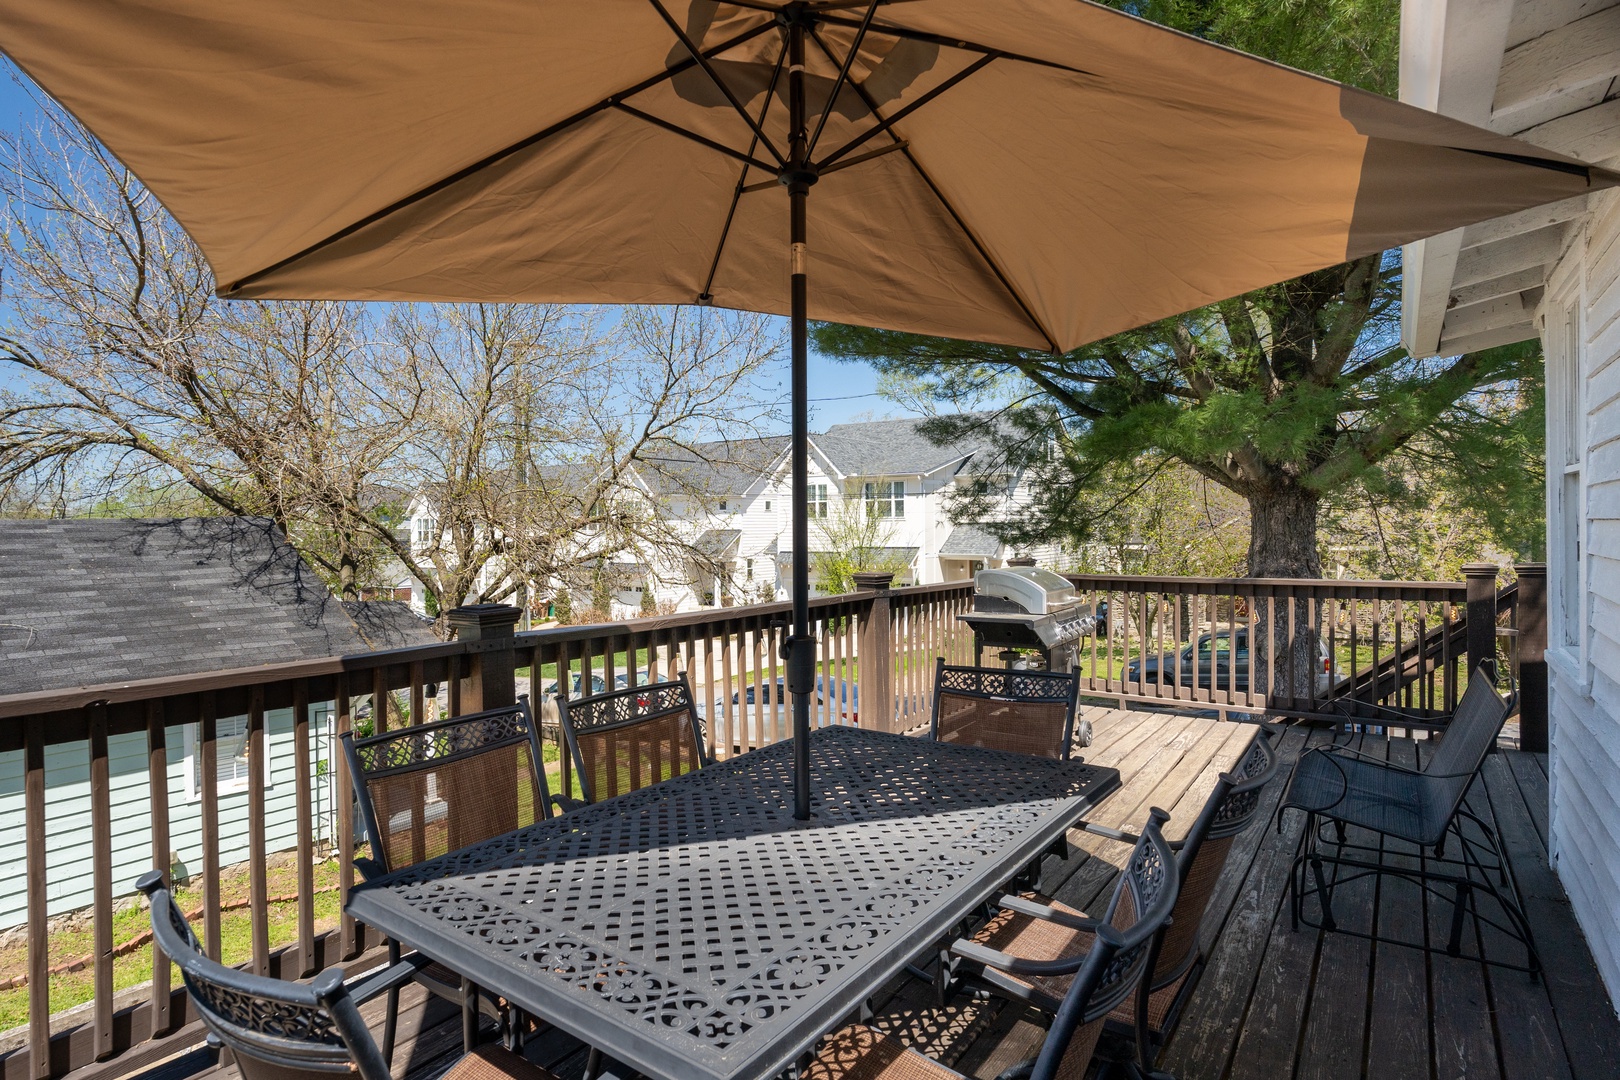 Outdoor dining and gas BBQ grill